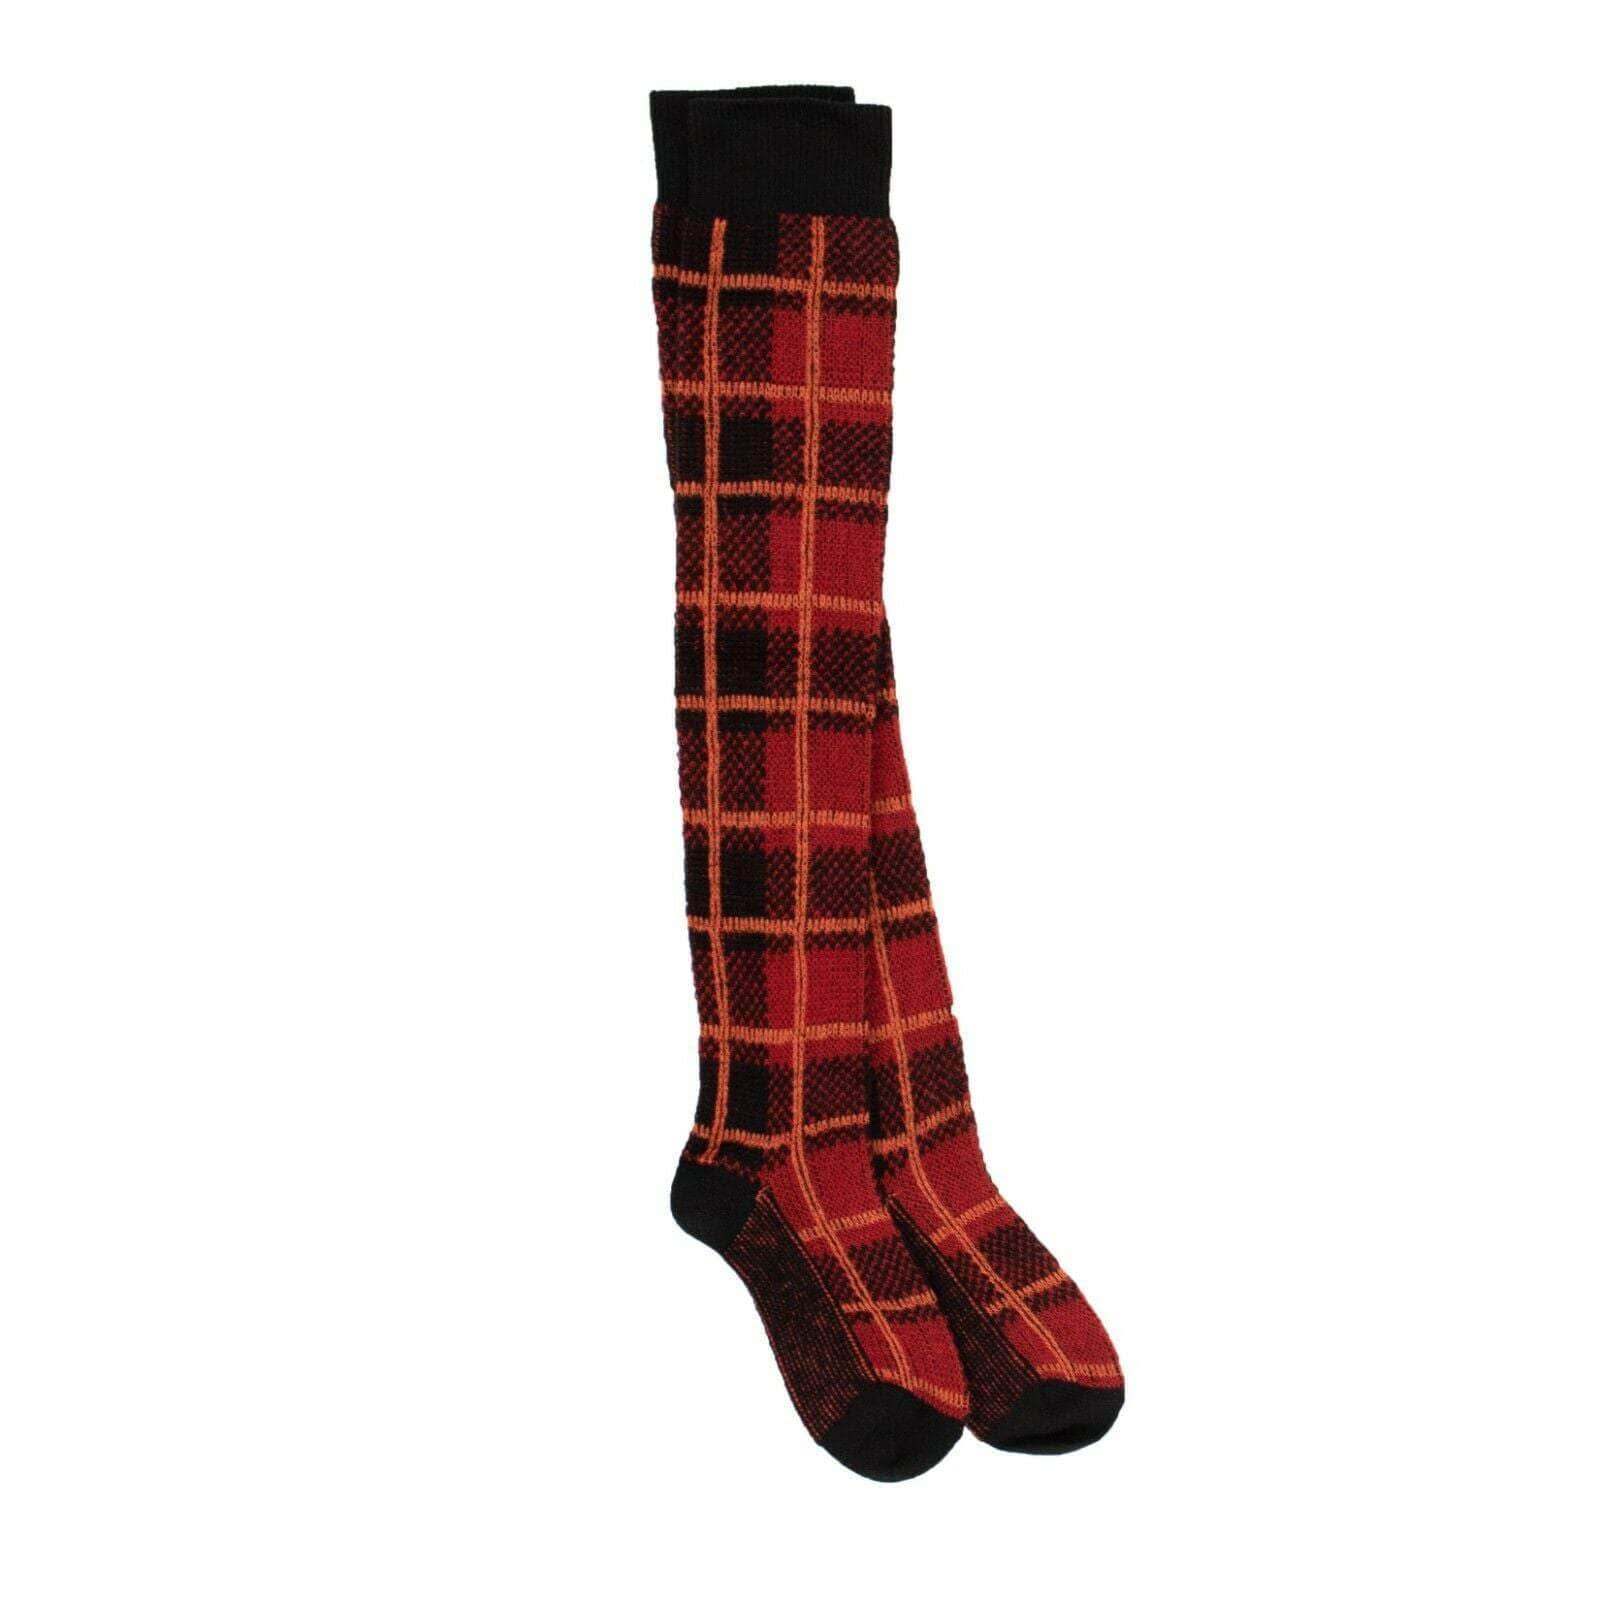 UNRAVEL PROJECT channelenable-all, couponcollection, gender-womens, main-accessories, sale-enable, size-sm, under-250, unravel-project, womens-socks SM Red Wool Checkered Over Knee Socks 82NGG-UN-3009/SM 82NGG-UN-3009/SM